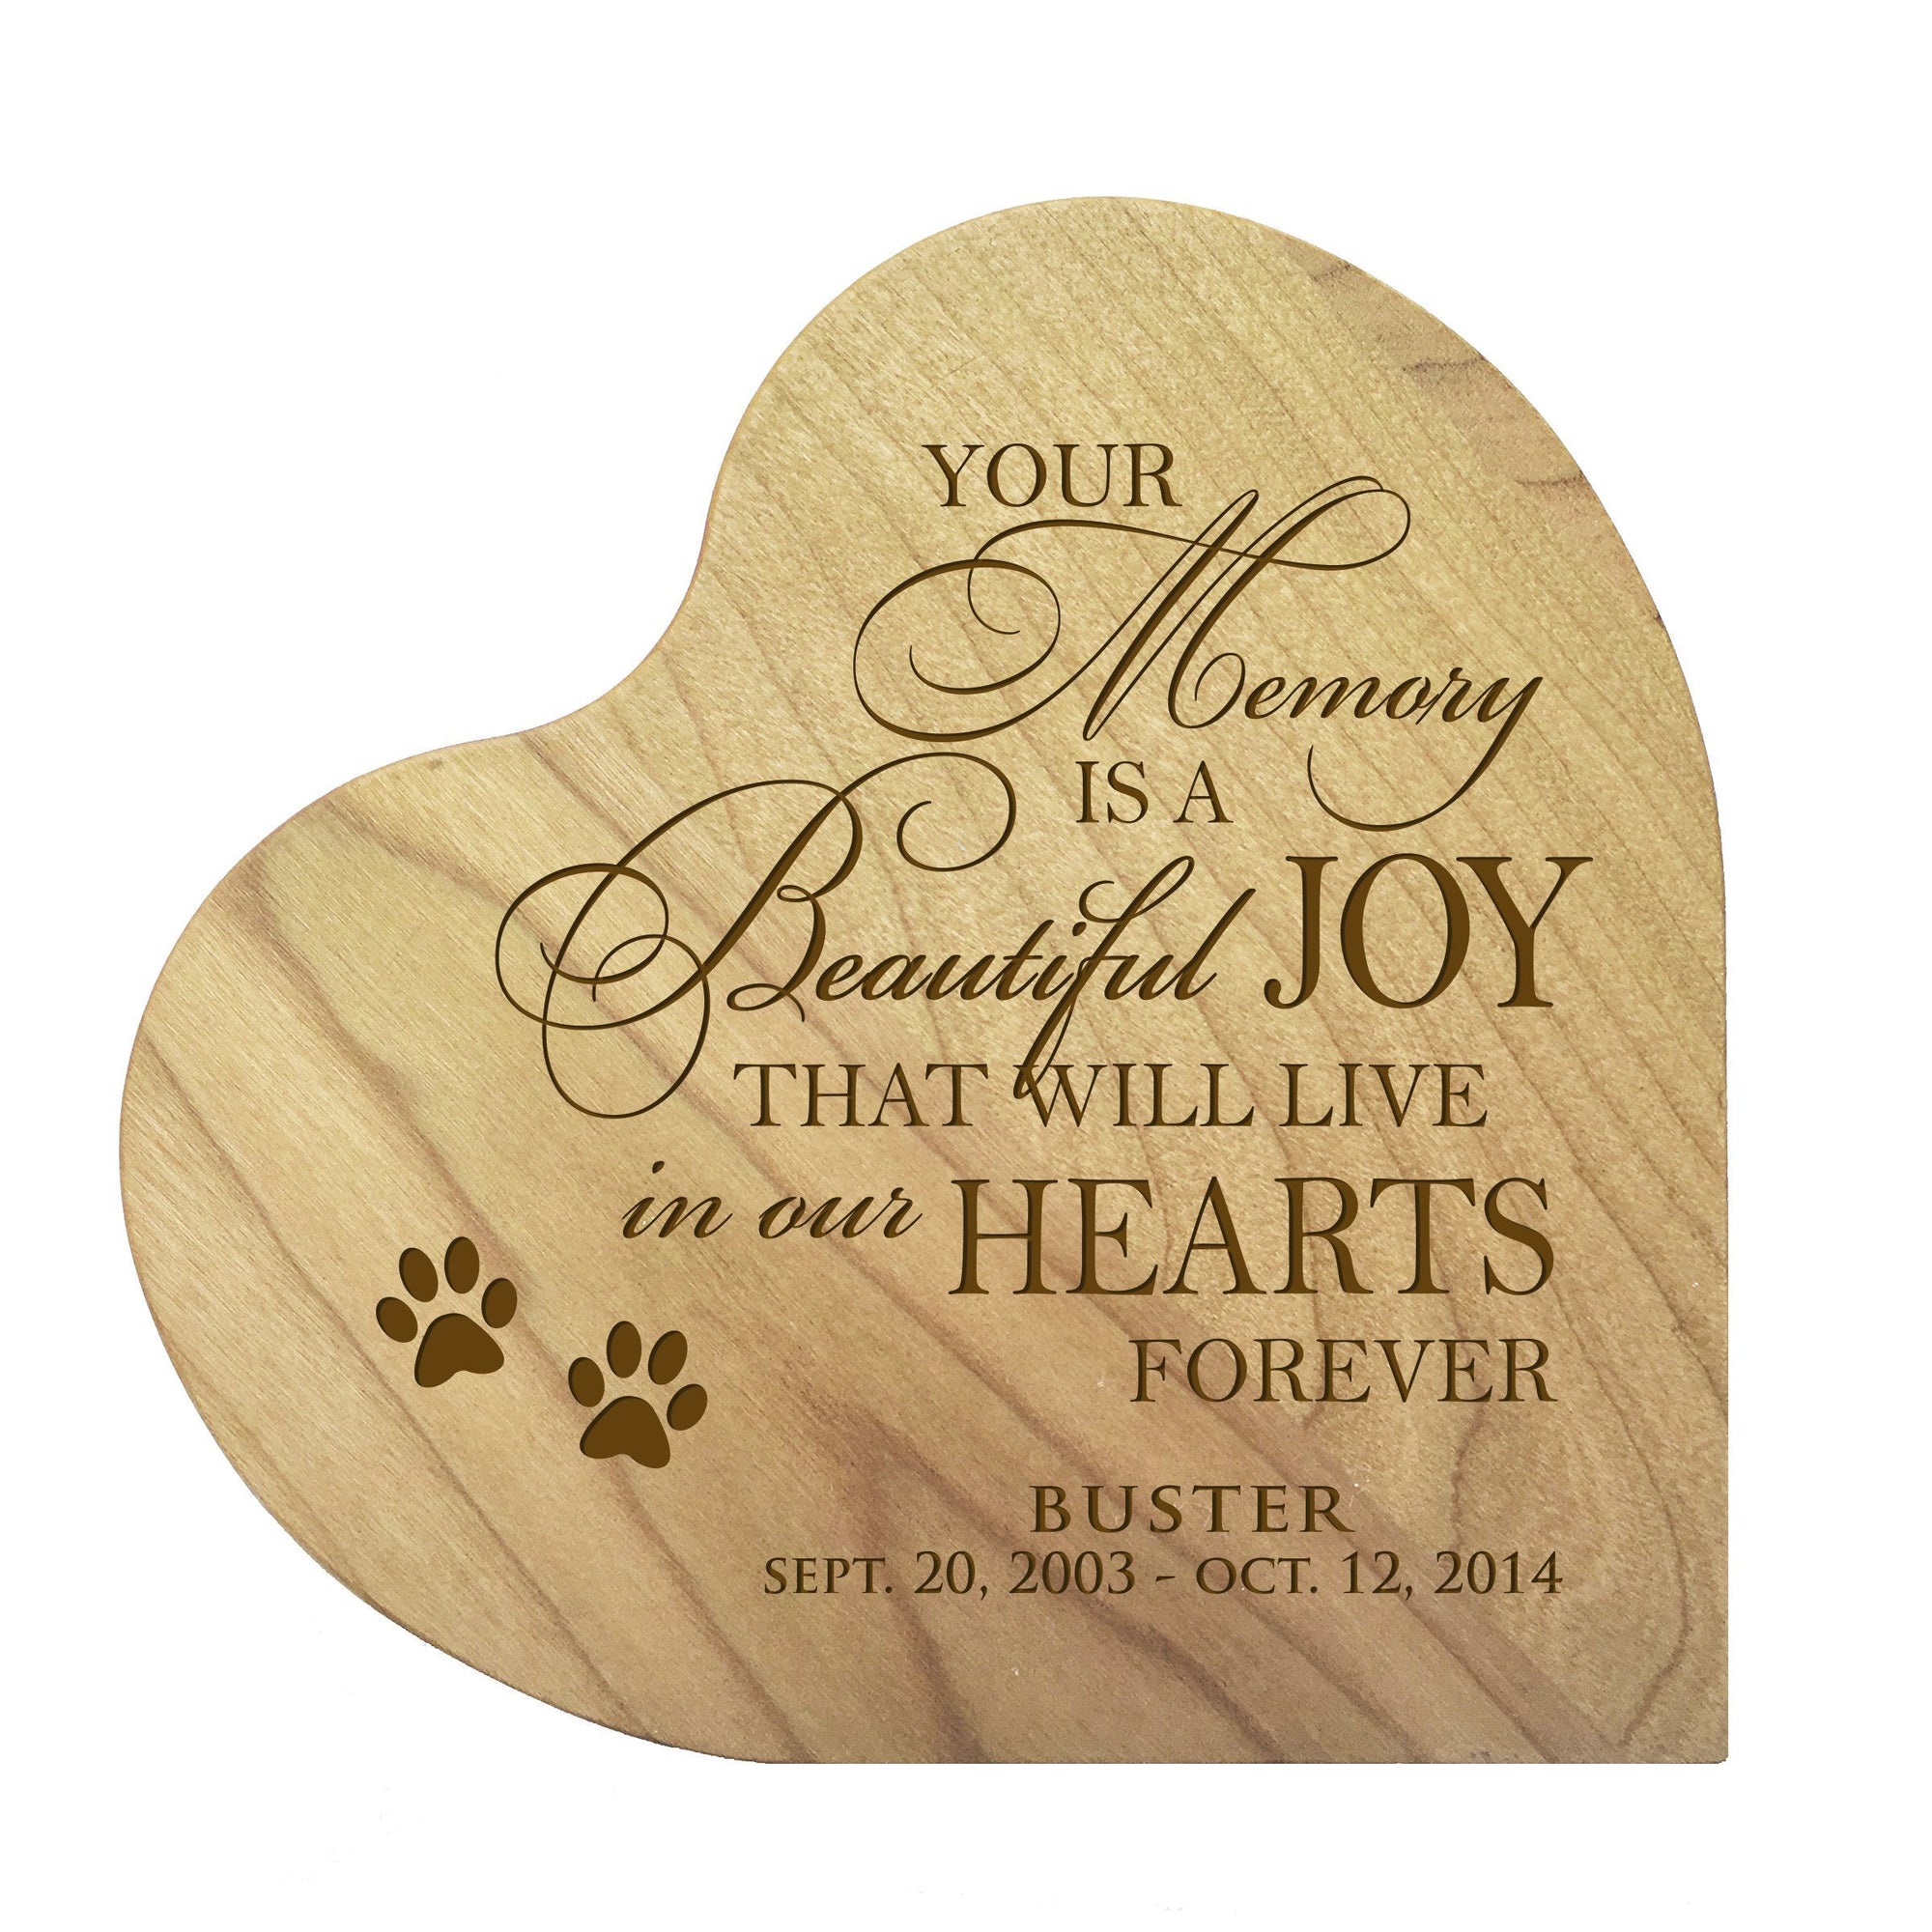 Maple Pet Memorial Heart Block Decor with phrase "Your Memory Is A Beautiful Joy"